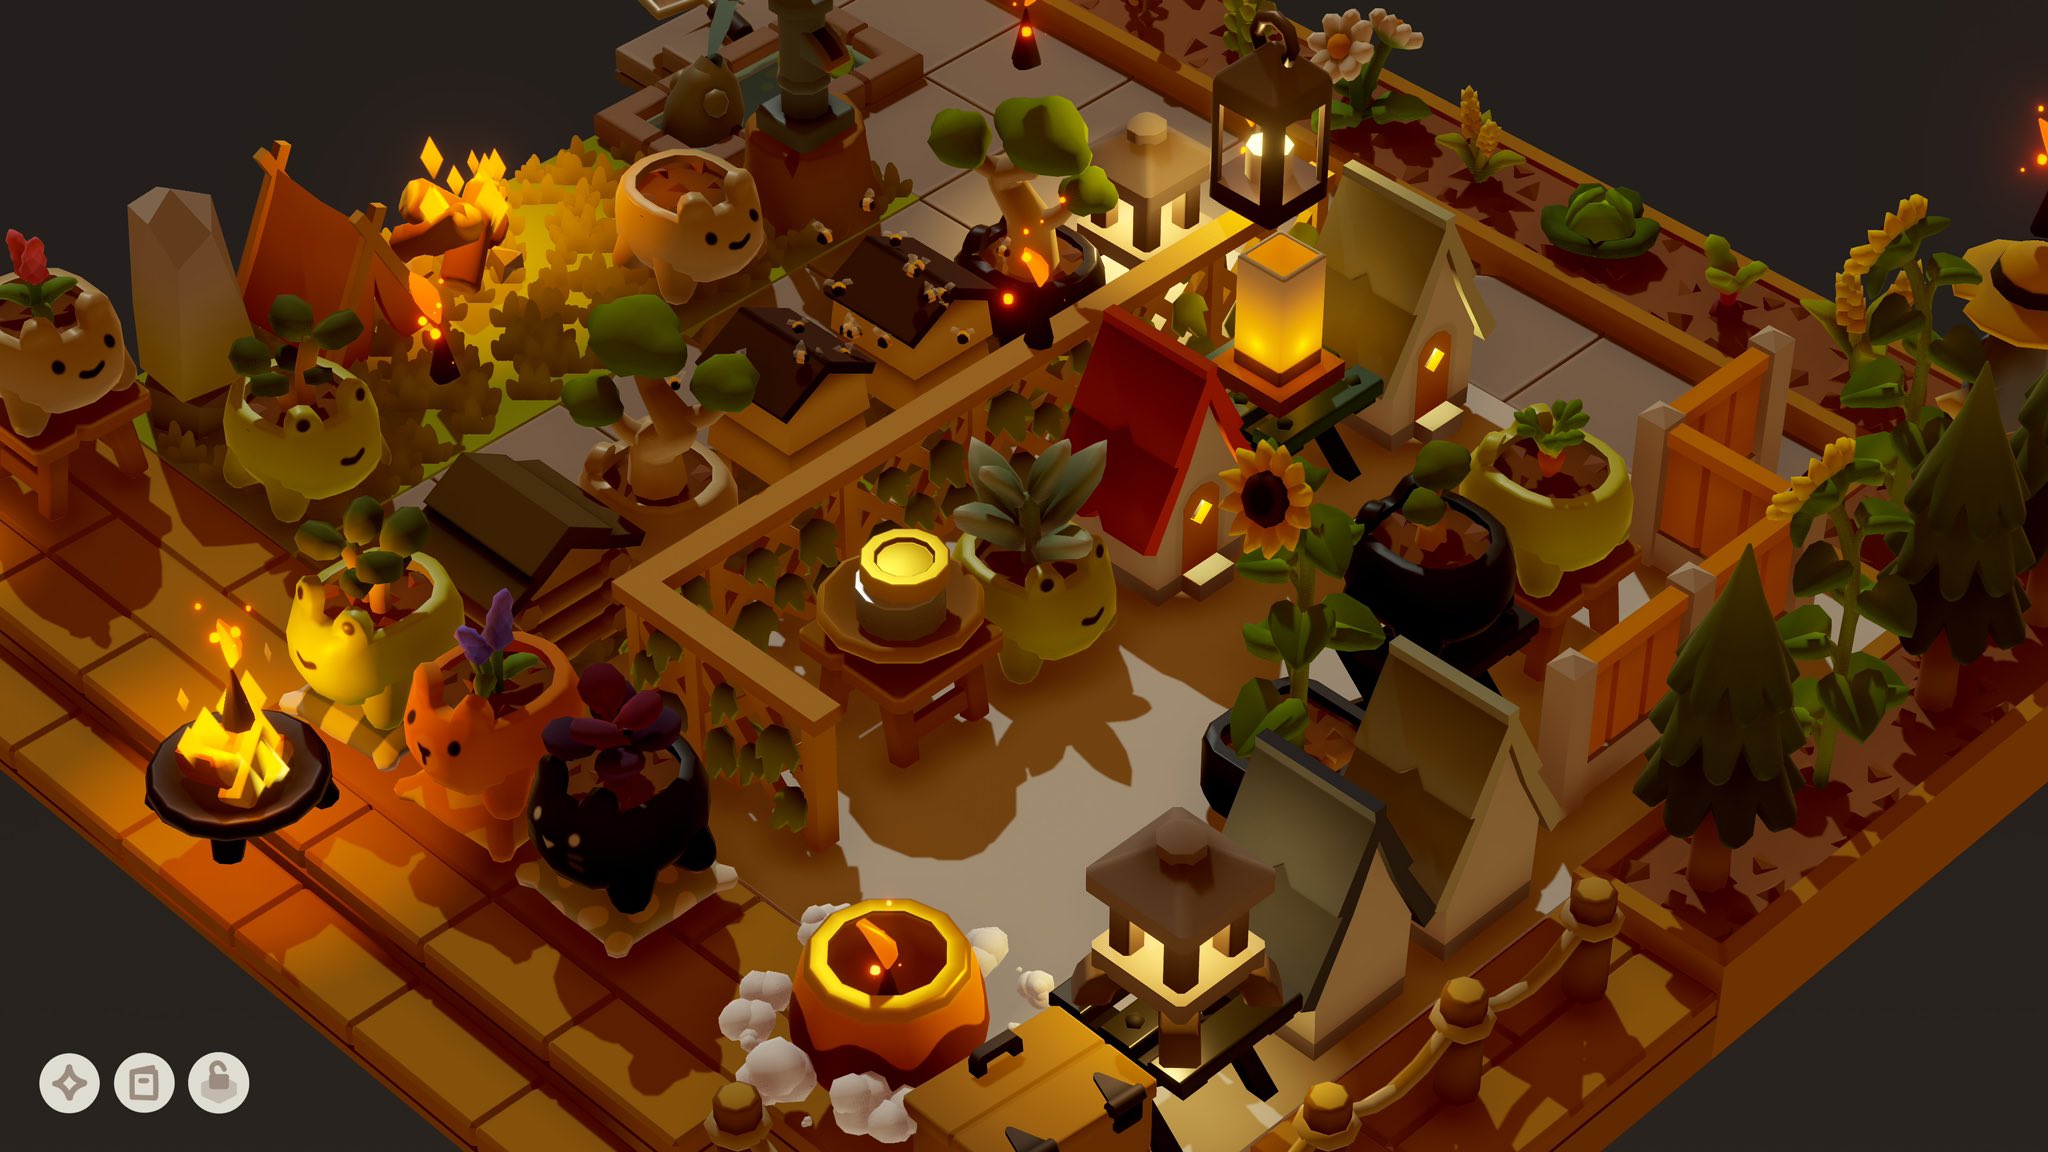 An isometric 3d model of cute home and plant themed items, like fences, animal planters, flowers, and many different plants. The lighting is dark and the environment is lit by various lanterns and campfires.